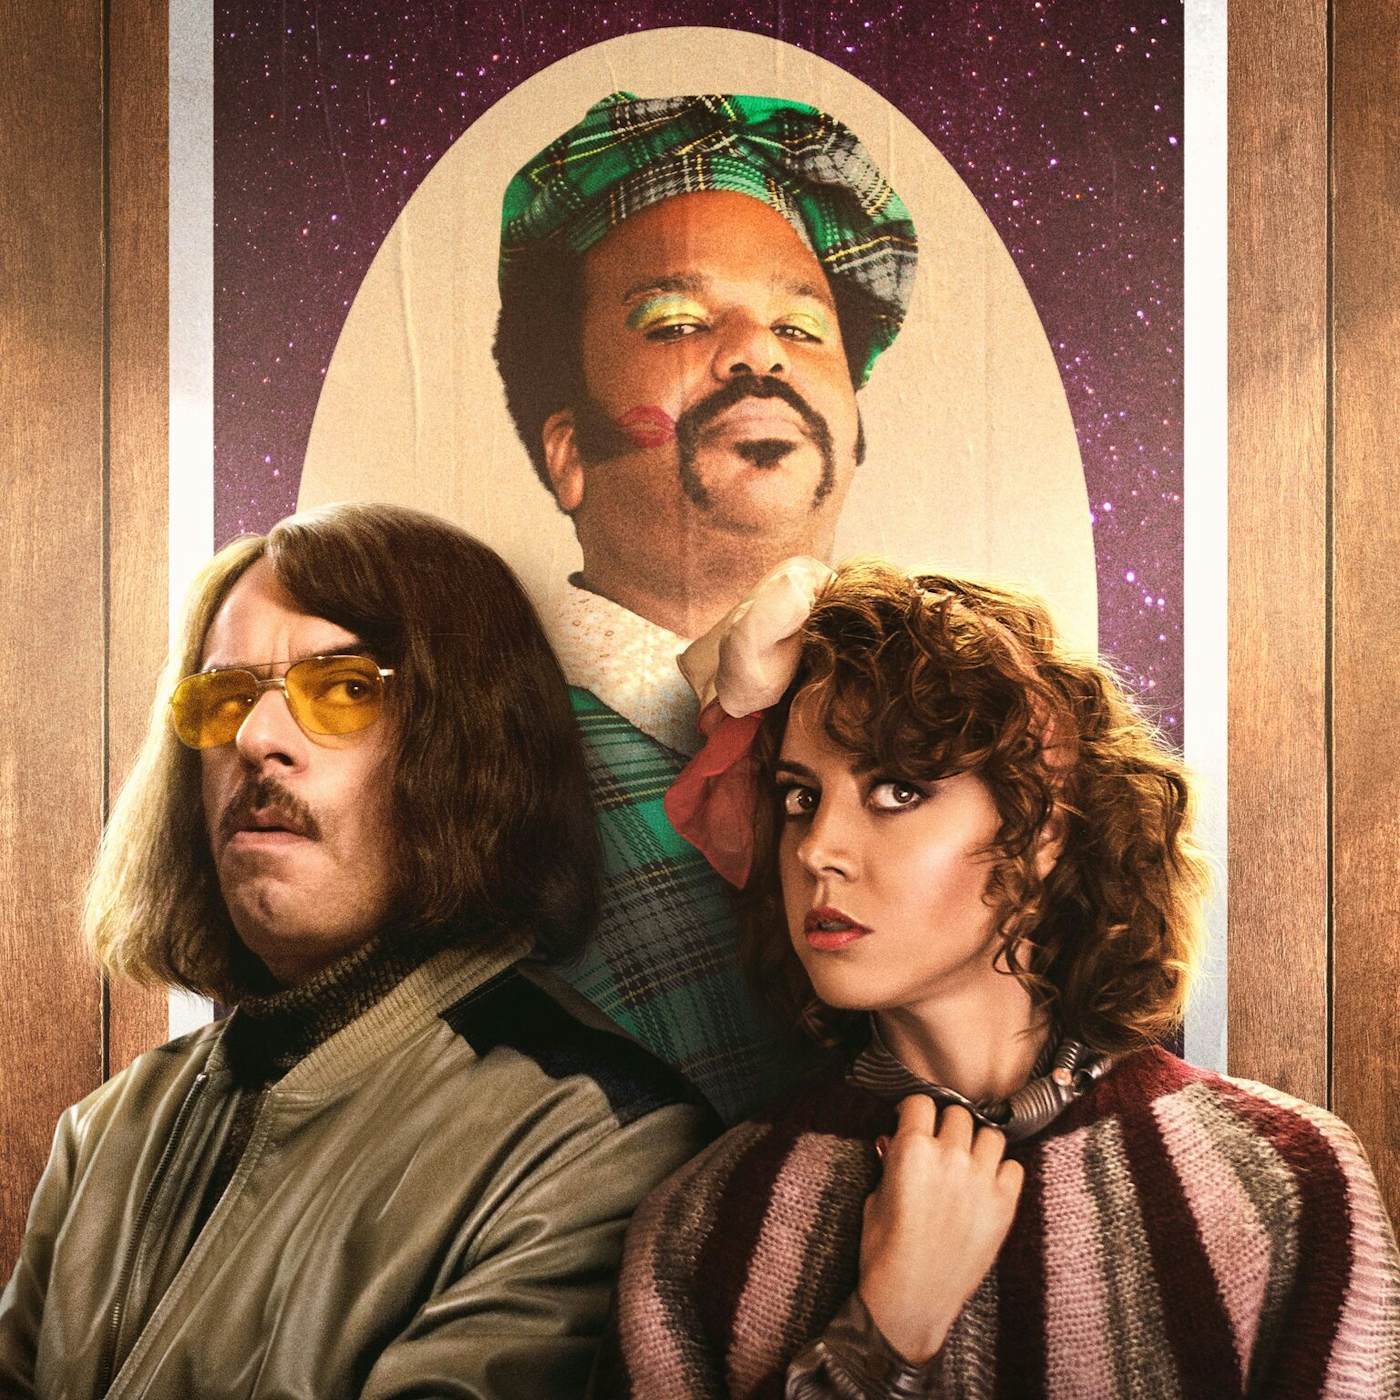 Andrew Hung AN EVENING WITH BEVERLY LUFF LINN / Original Soundtrack Vinyl Record